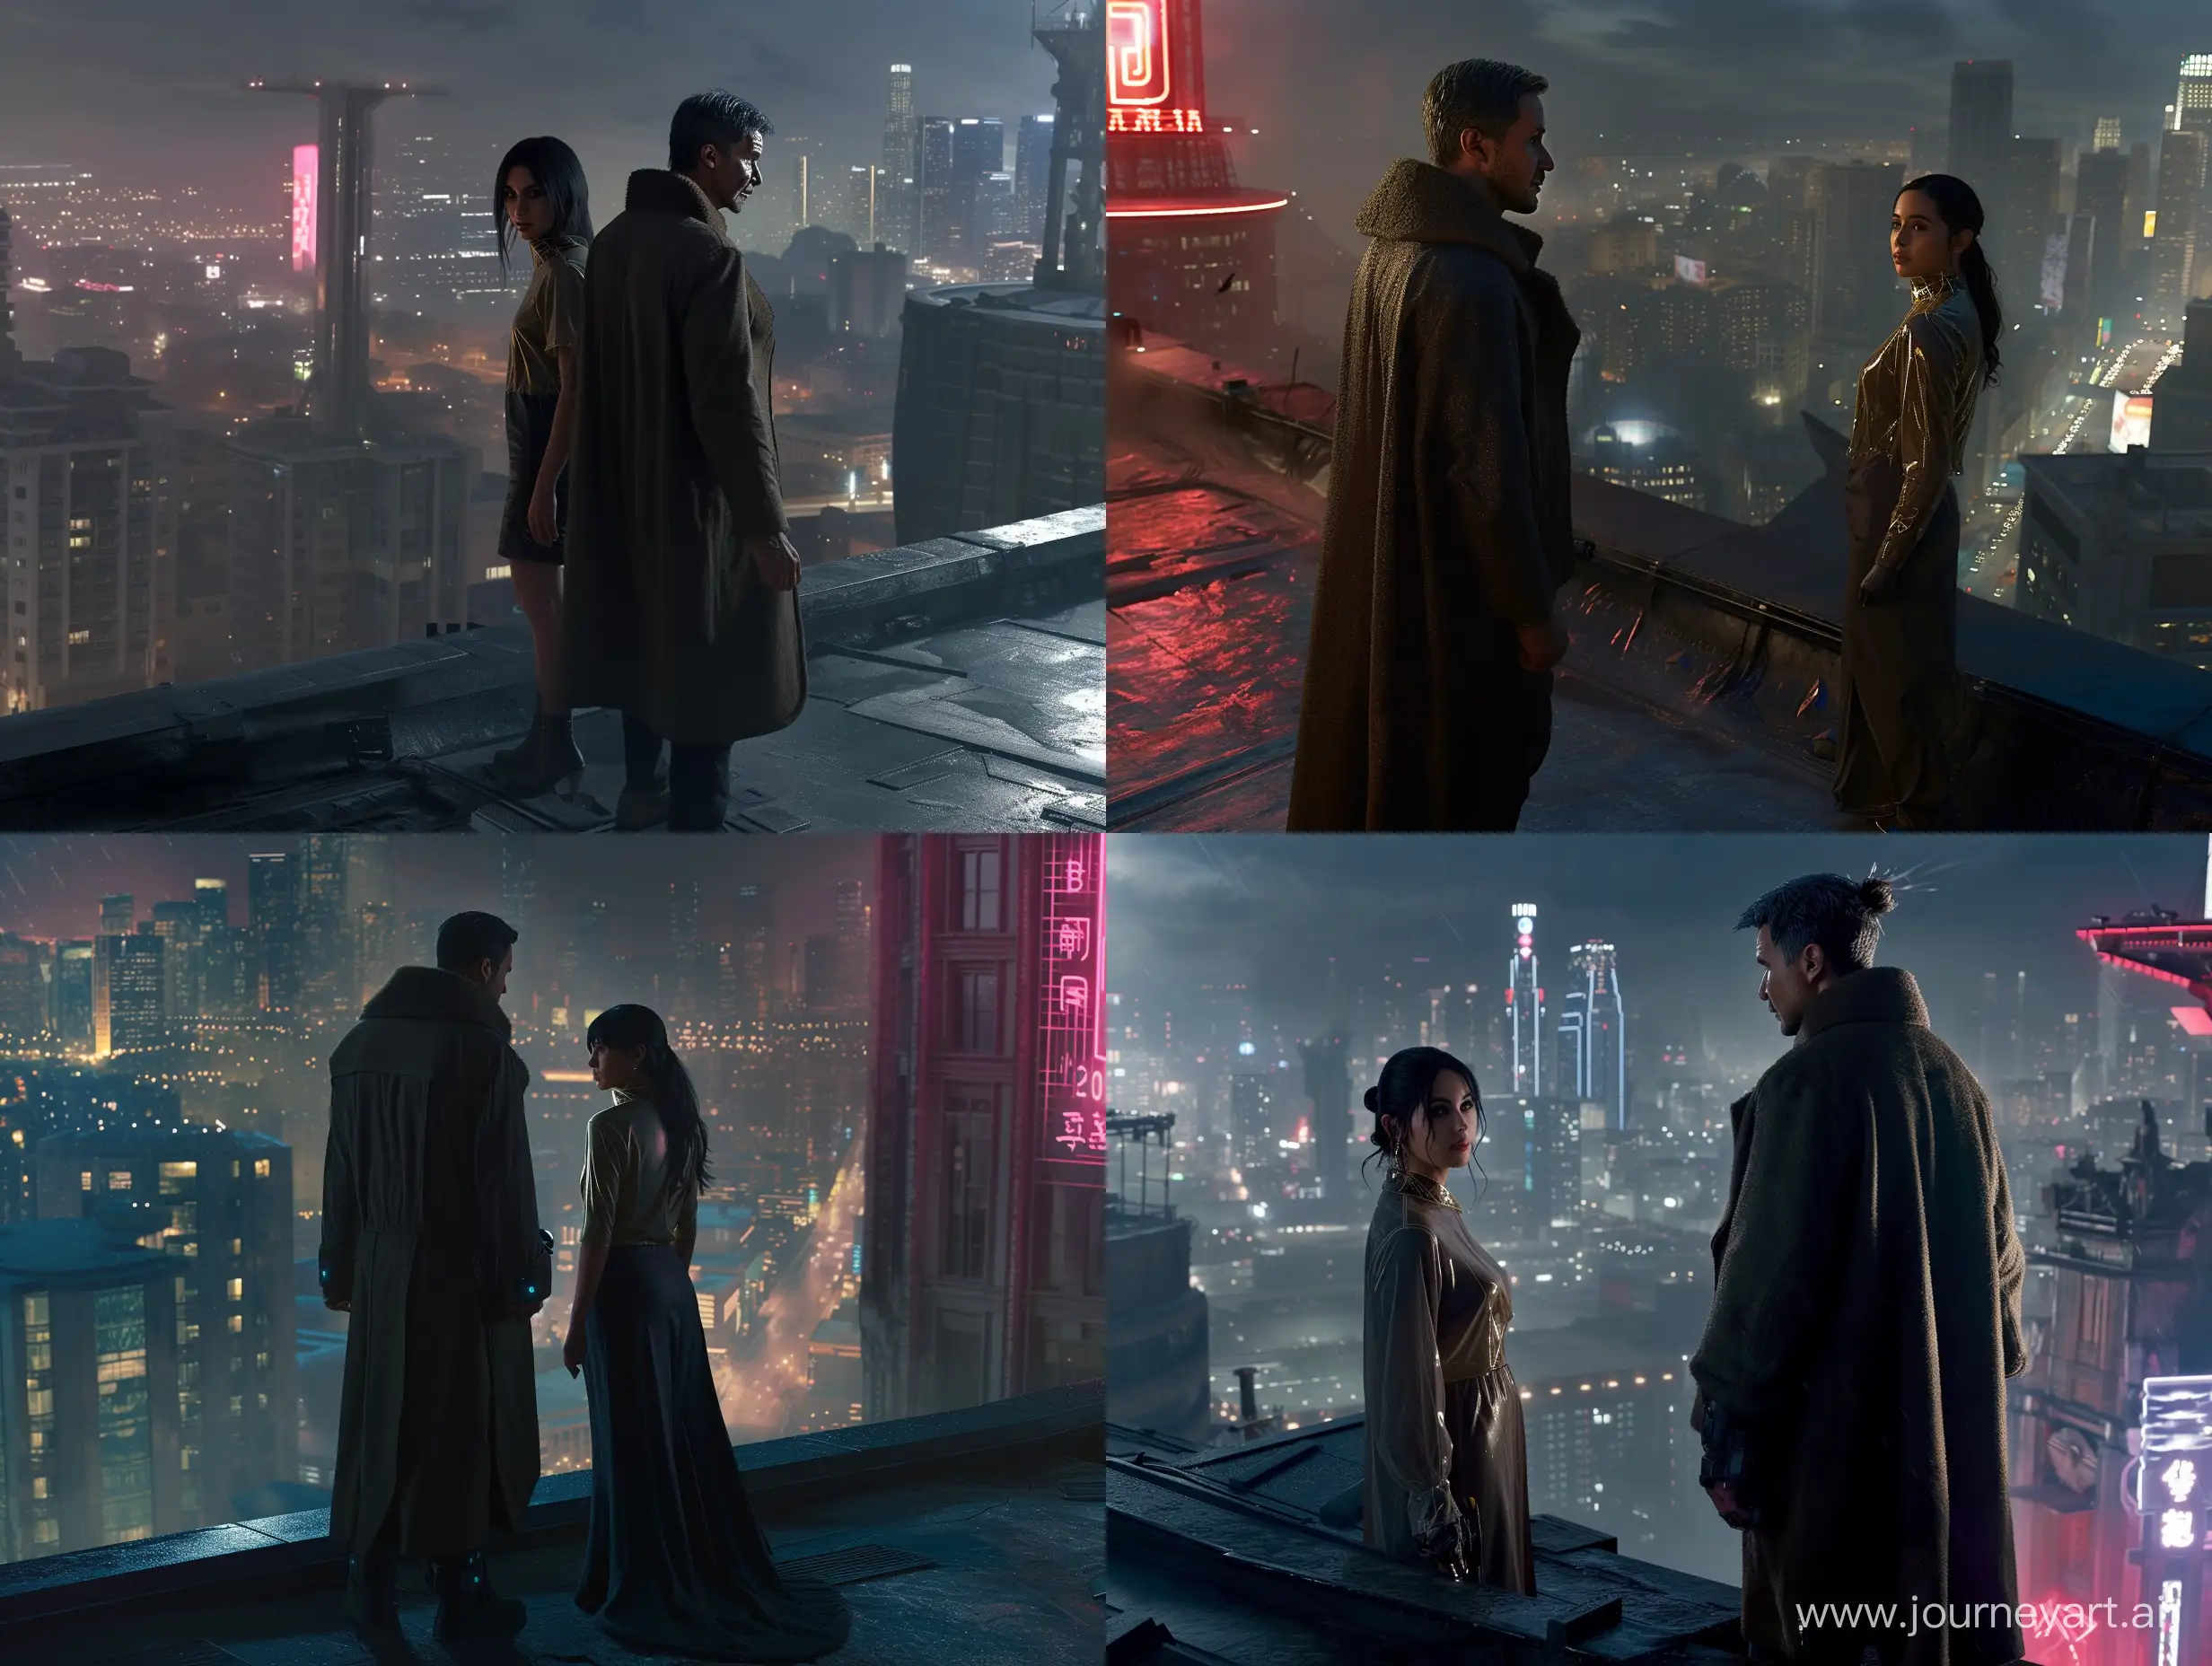 "Blade Runner 2049" is a video game set in a futuristic city in Los Angeles, featuring advanced ray tracing graphics and a third-person perspective from behind. Specifically designed for the PS5, this version follows the main character, portrayed by a male named Ryan Gosling, as he stands on the roof next to a enhanced women, delivering an expansive open-world adventure powered by the Unreal Engine, all set in a nighttime atmosphere 